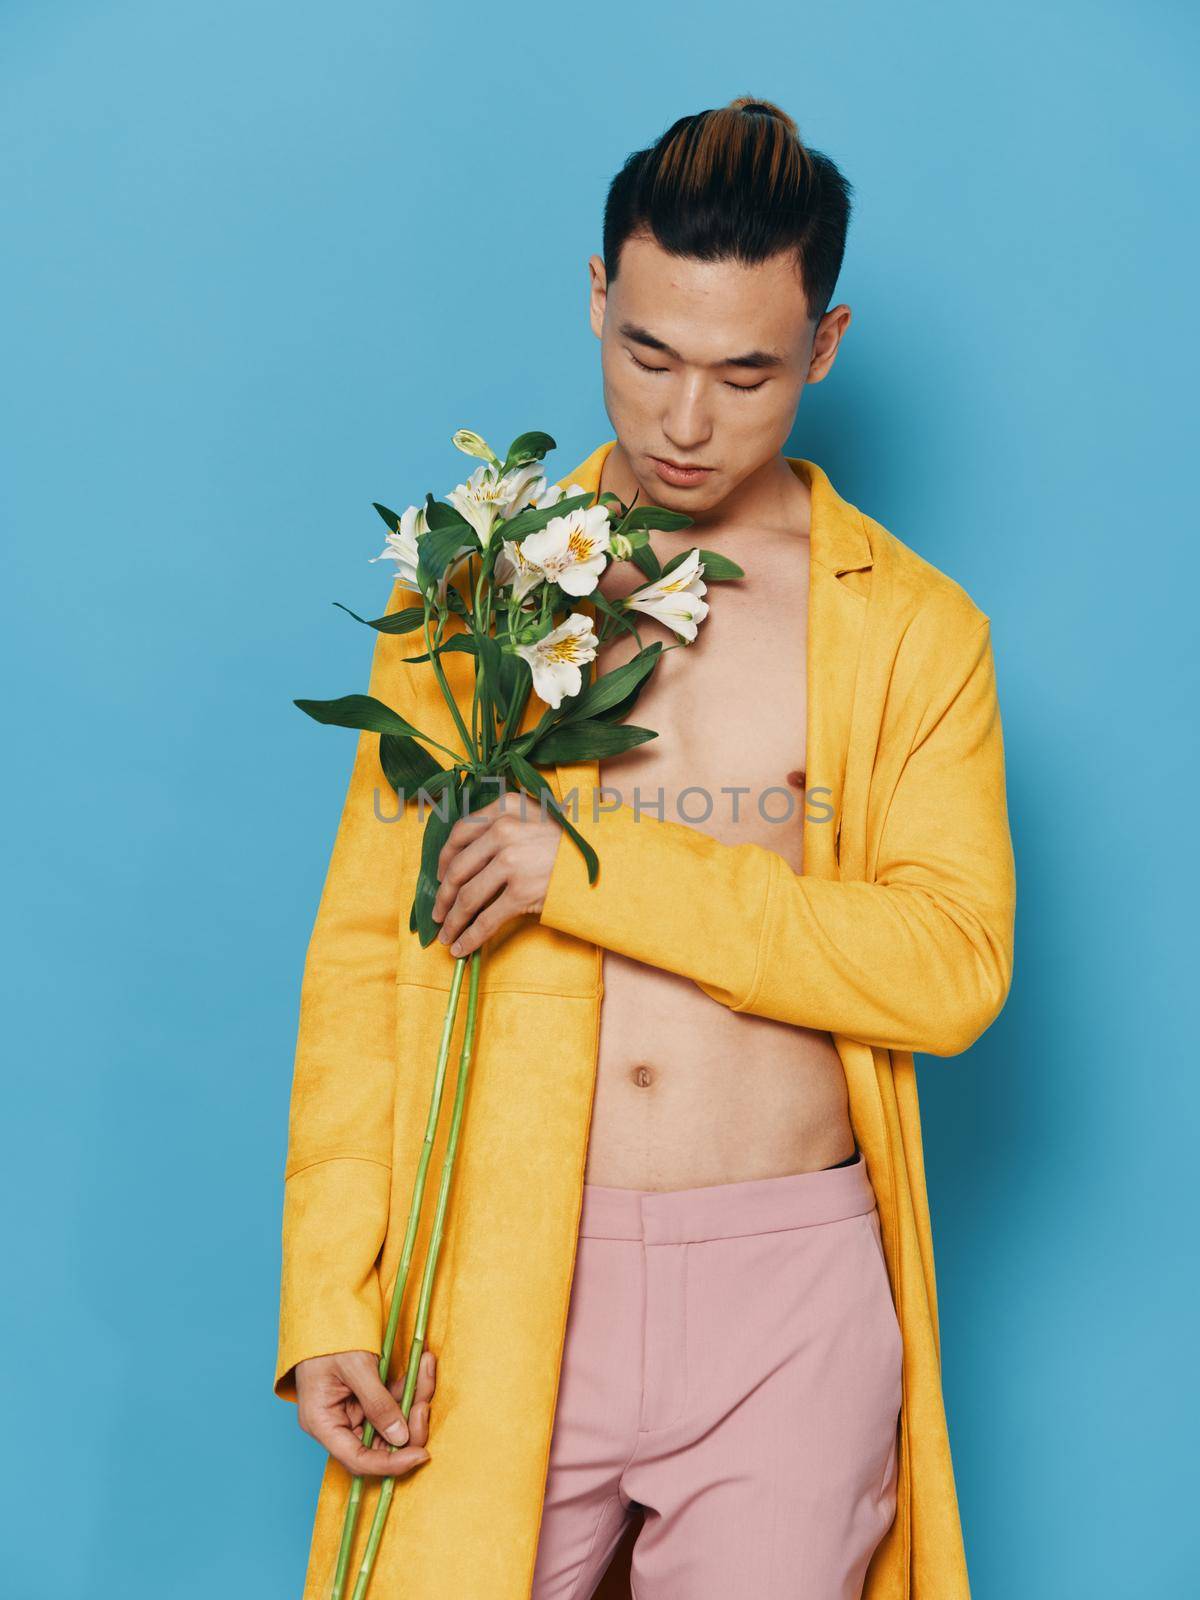 Portrait of a man of Asian appearance on a blue background with a bouquet of white flowers and a yellow coat. High quality photo